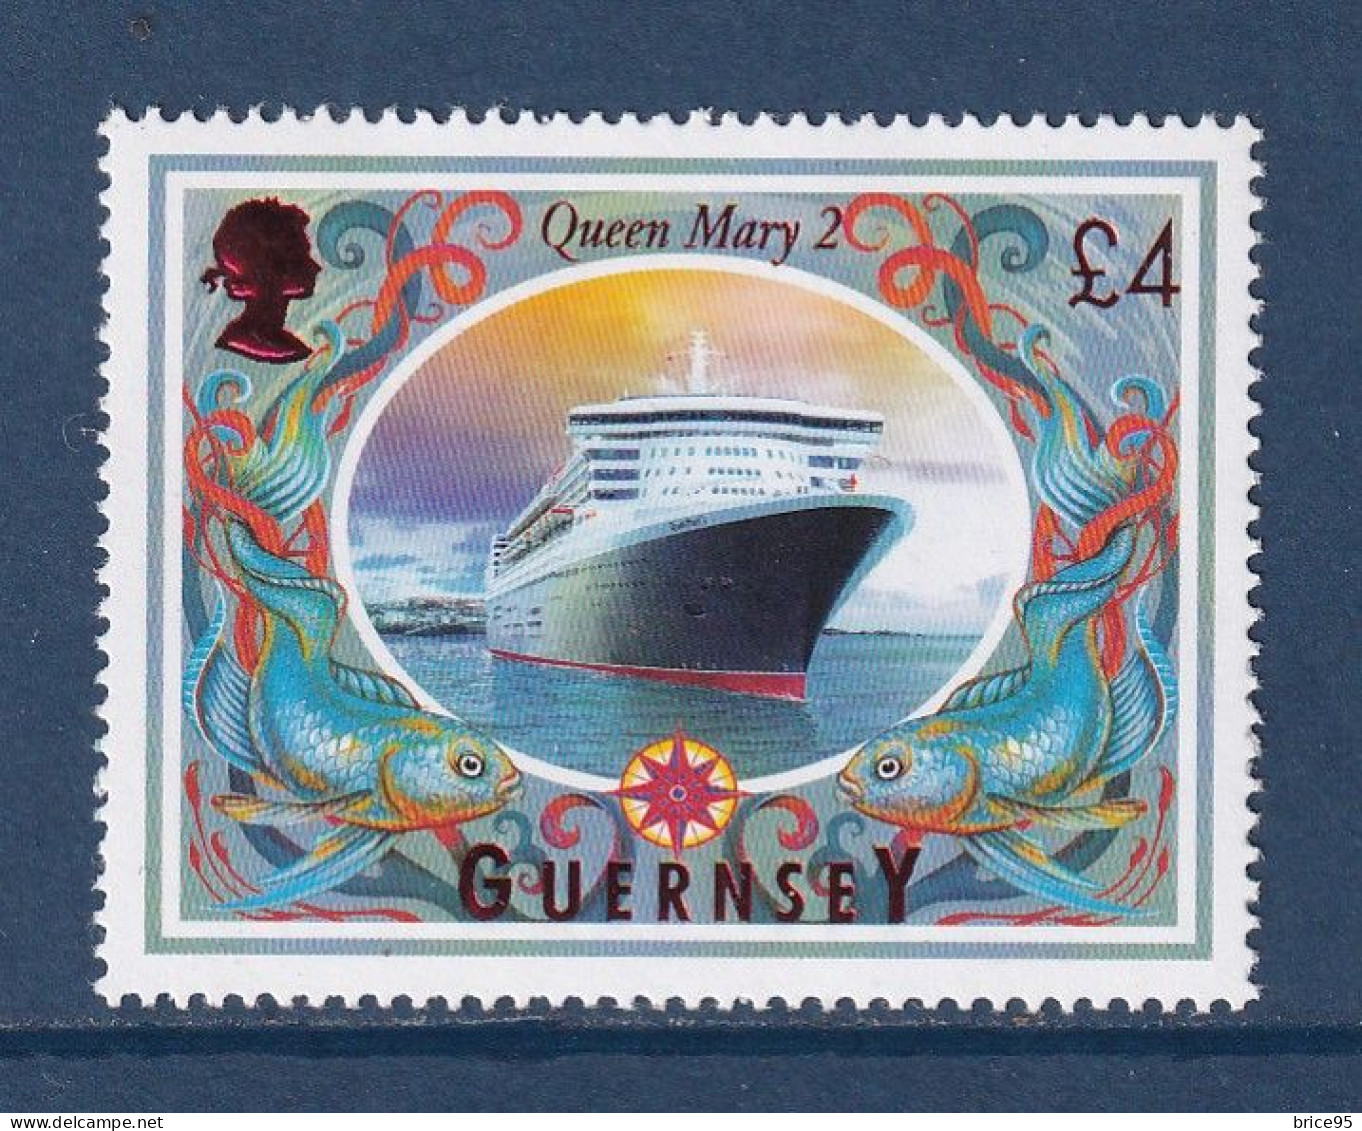 Guernesey - YT N° 1062 ** - Neuf Sans Charnière - 2005 - Guernesey